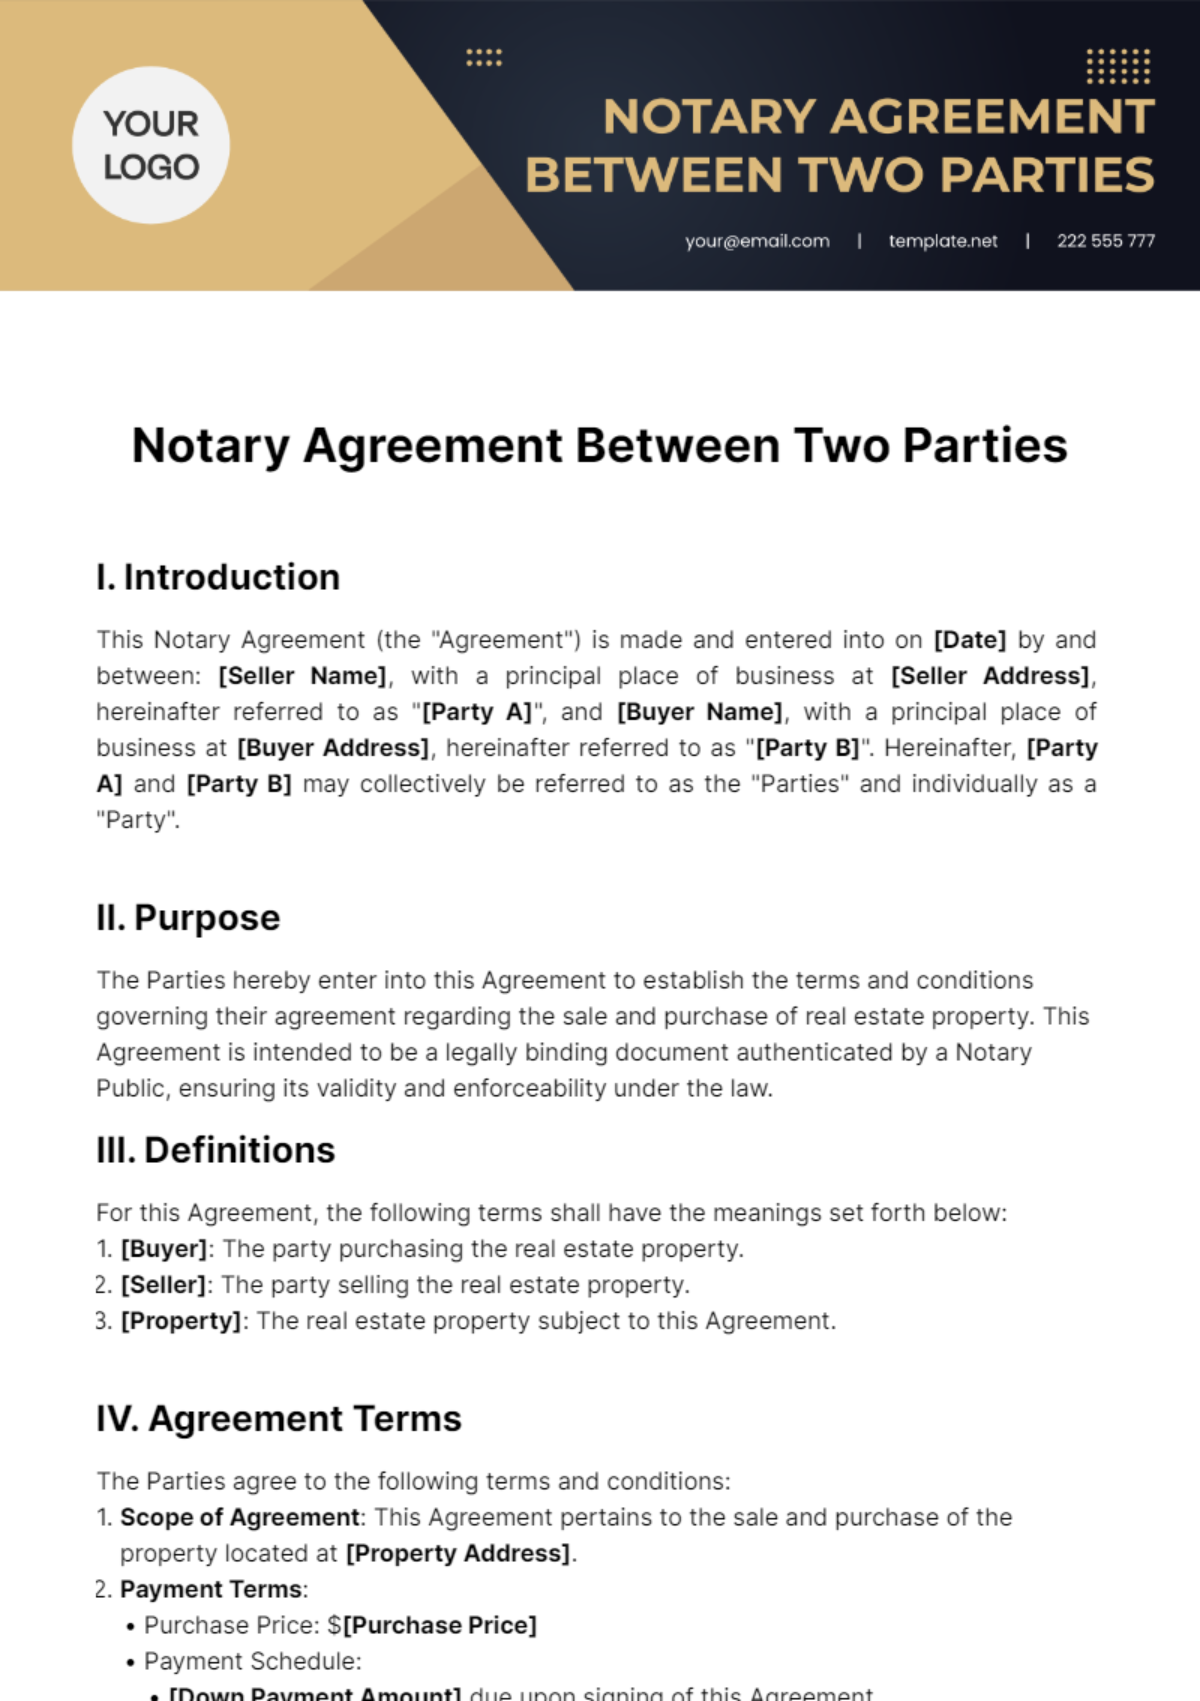 Notary Agreement Between Two Parties Template